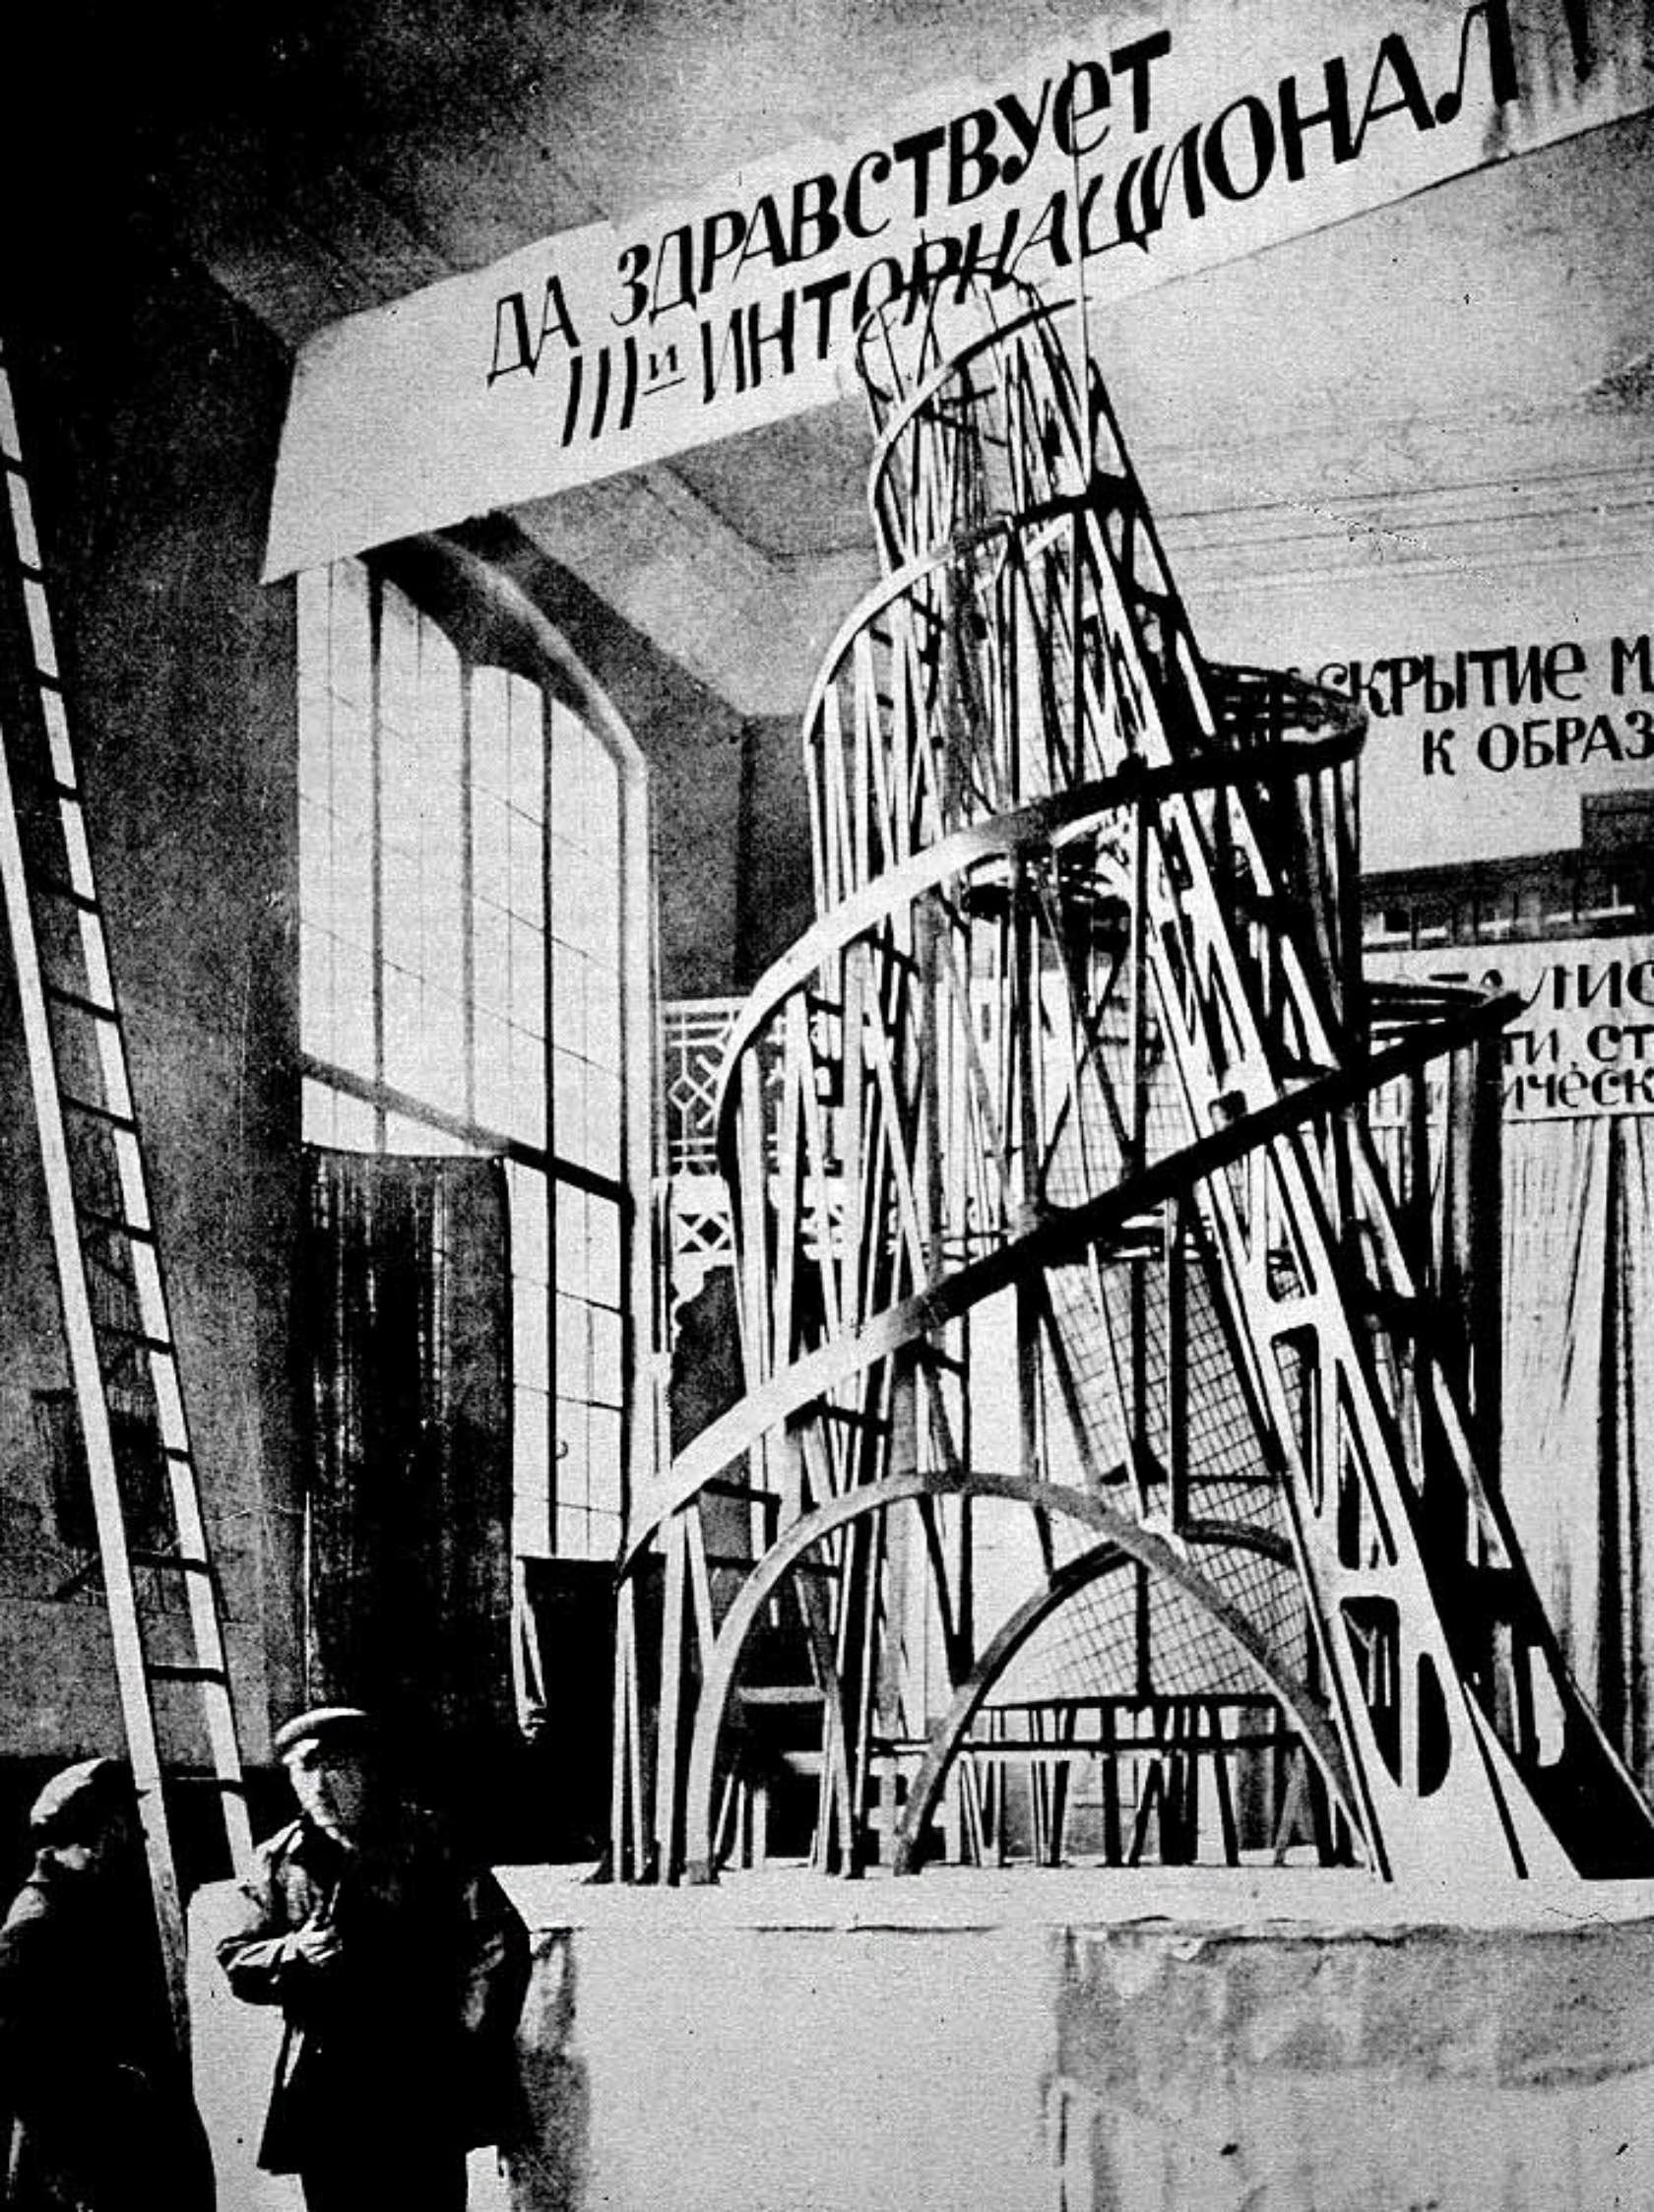 An evocative black-and-white photograph from 1919 showcases the model of 'Tatlin’s Tower', conceptualized by Vladimir Tatlin. The intricate tower structure, a fusion of spiraling frameworks and geometrical shapes, stands prominently against a backdrop of large windows in a spacious room. The banner reading 'ДА ЗДРАВСТВУЕТ III-й ИНТЕРНАЦИОНАЛ' ('LONG LIVE THE THIRD INTERNATIONAL') hangs overhead. In the foreground, Vladimir Tatlin and an assistant are seen observing the tower, providing a sense of scale to the architectural masterpiece envisioned as a symbol of modernity and progress.